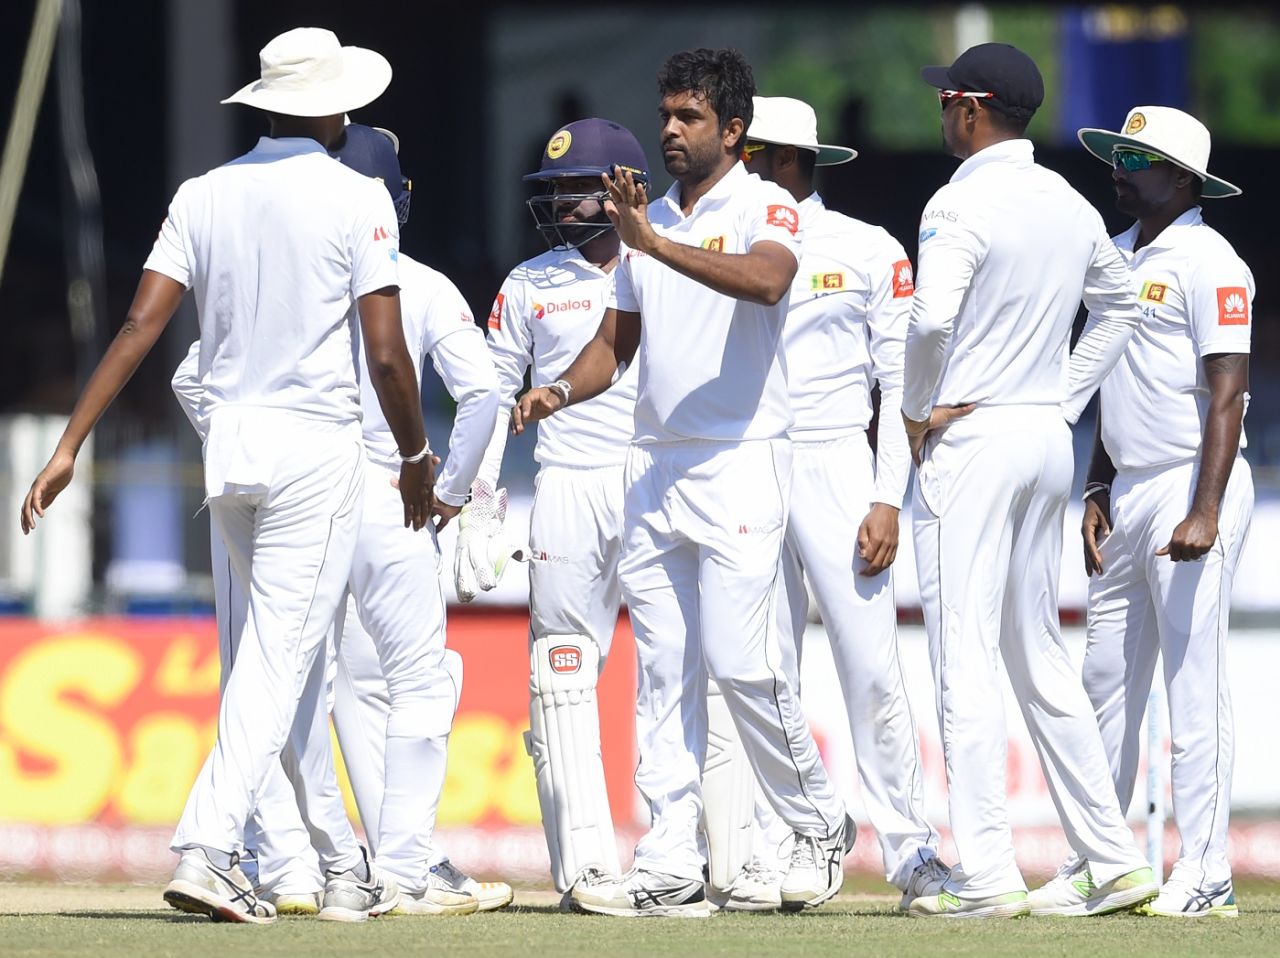 Dilruwan Perera took out both openers within the first hour, Sri Lanka v England, 3rd Test, SSC, 3rd day, November 25, 2018